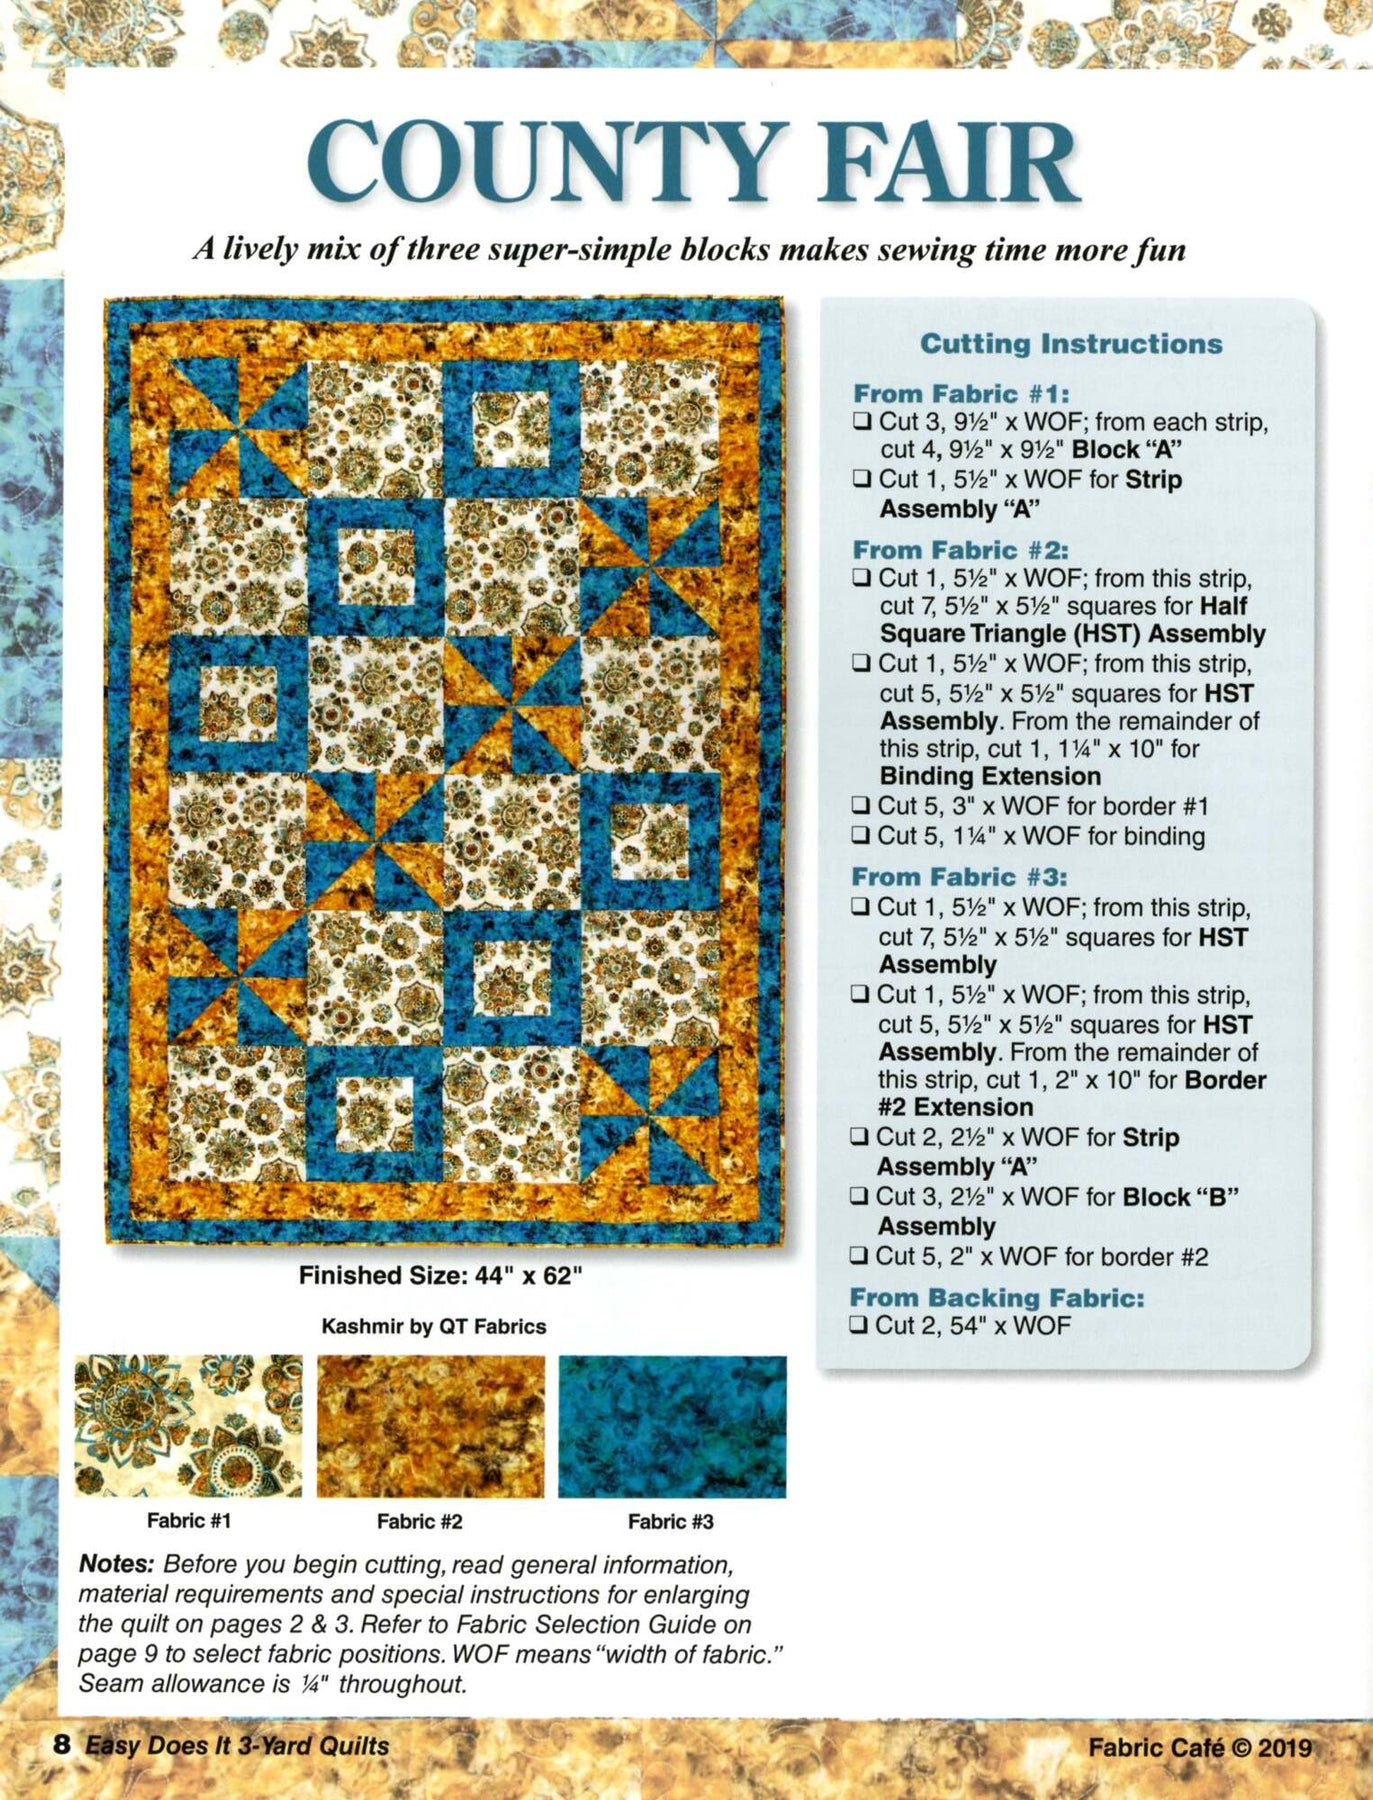 New!! One Block 3 Yard Quilts Book by Donna and Fran for Fabric Cafe